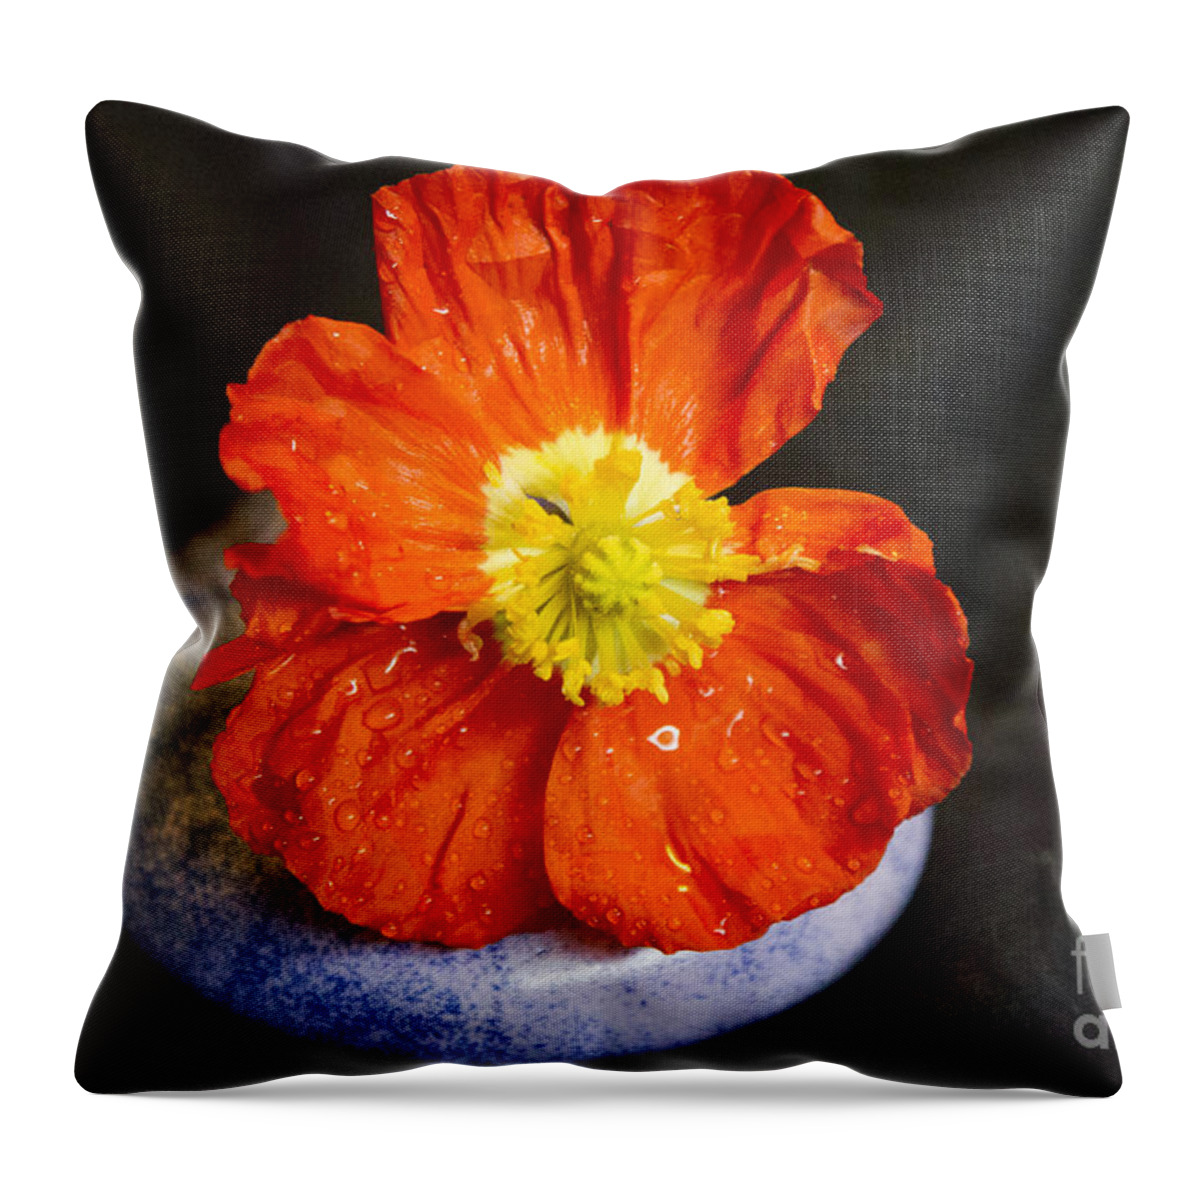 Raindrops Throw Pillow featuring the photograph Raindrops on Poppy by Jeanette French